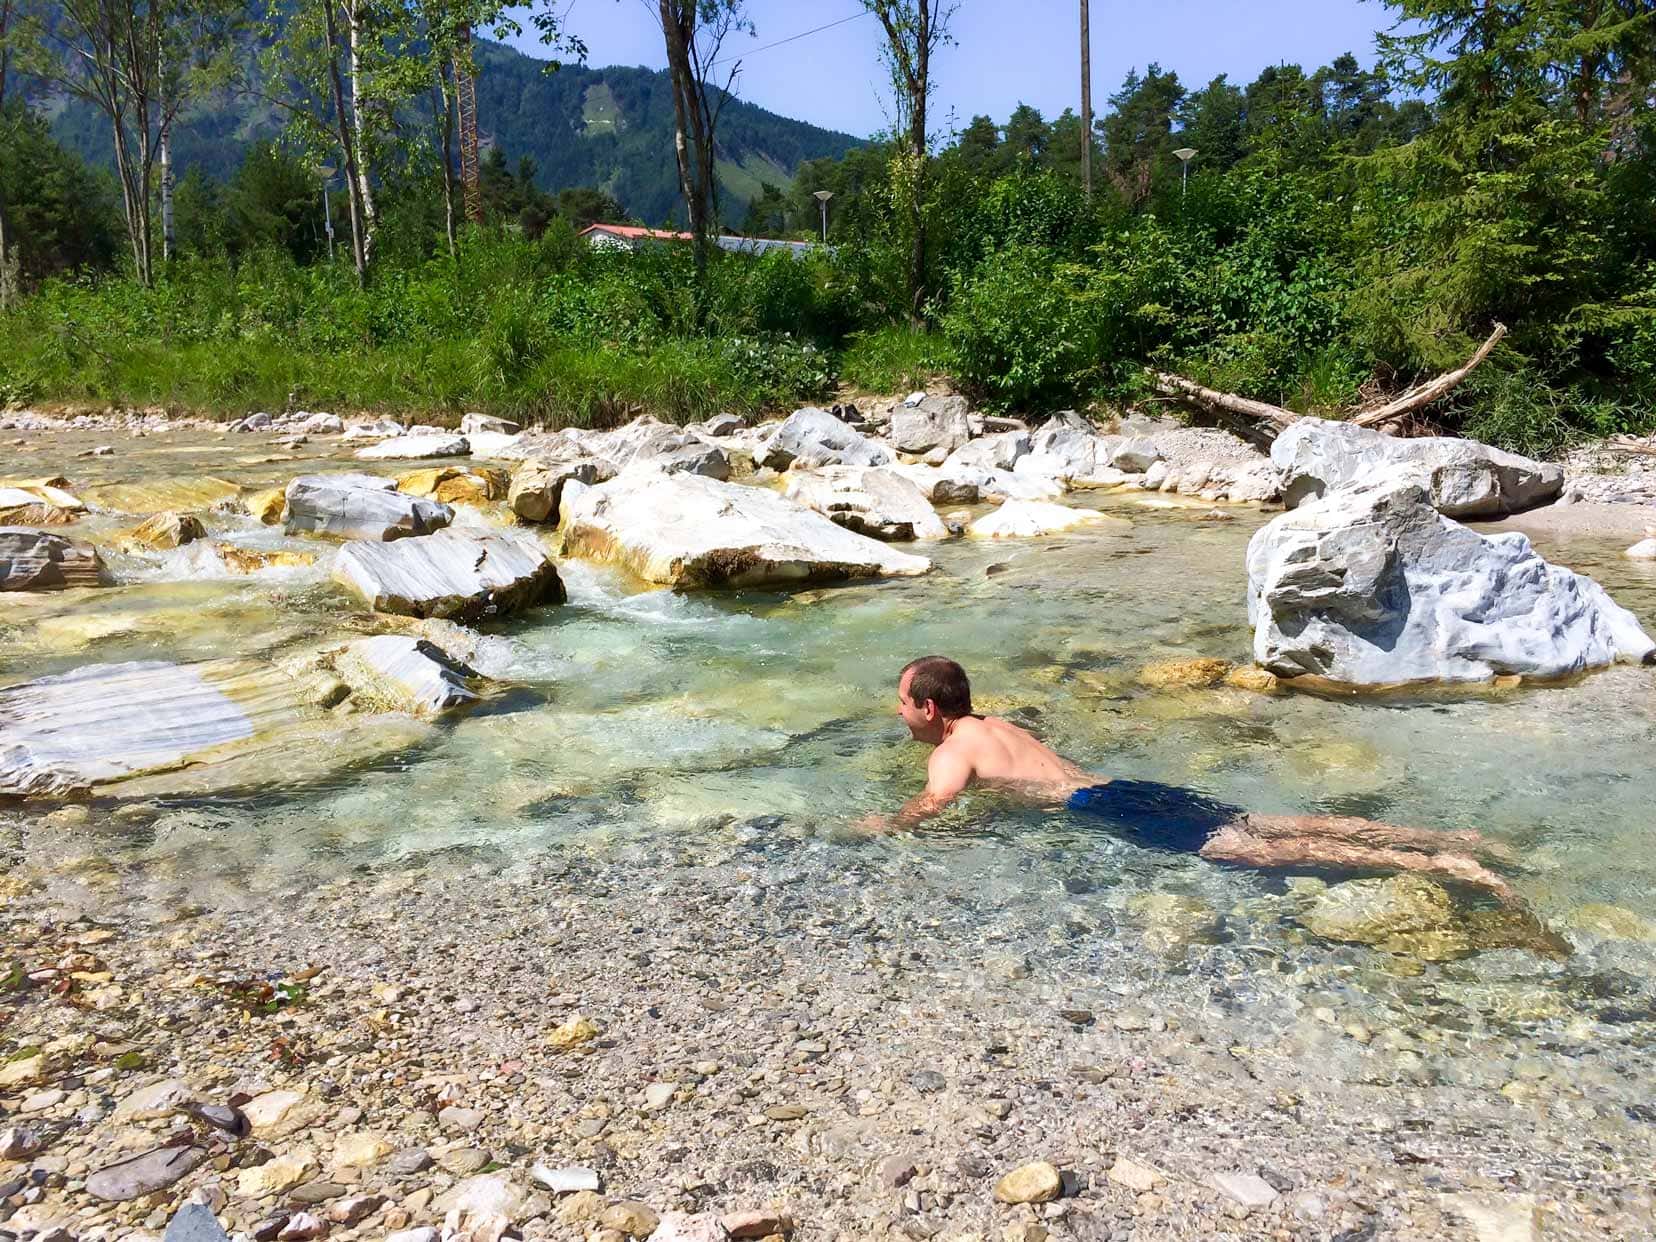 Lars-taking-a-much-needed-cool-dip-in-the-Austrian-summer-weather